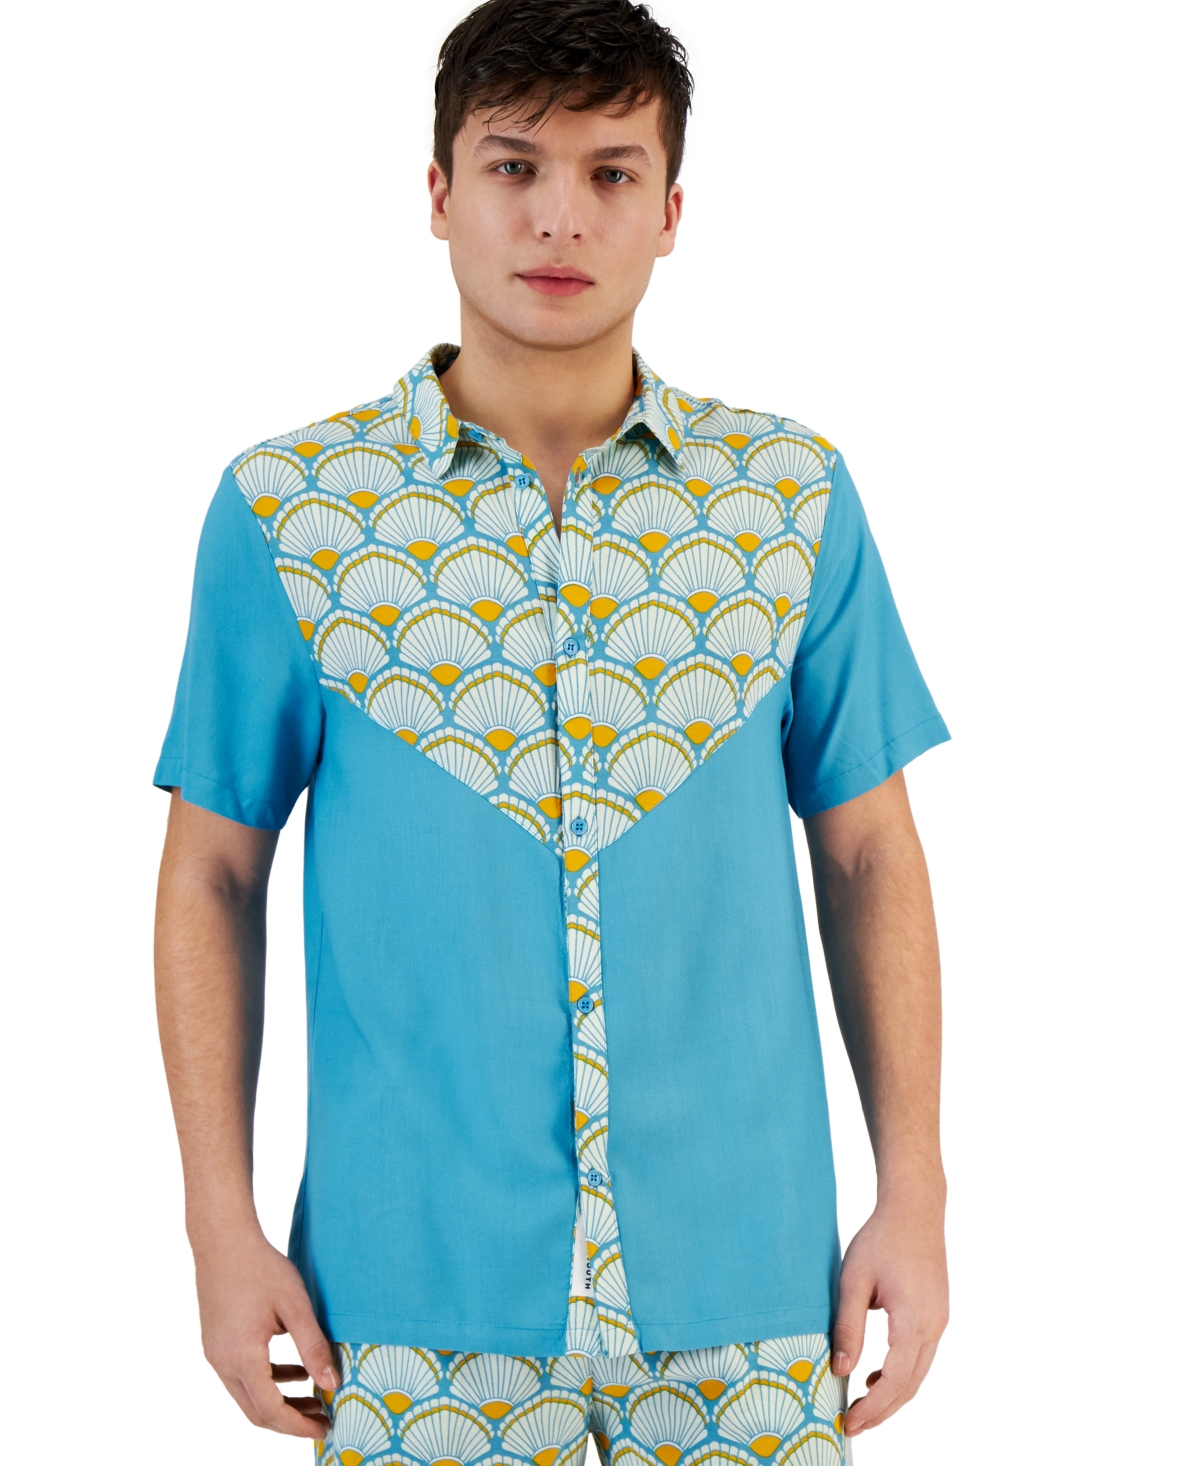 NATIVE YOUTH MEN'S CARRAWAY PRINTED SHORT SLEEVE BUTTON-FRONT SHIRT